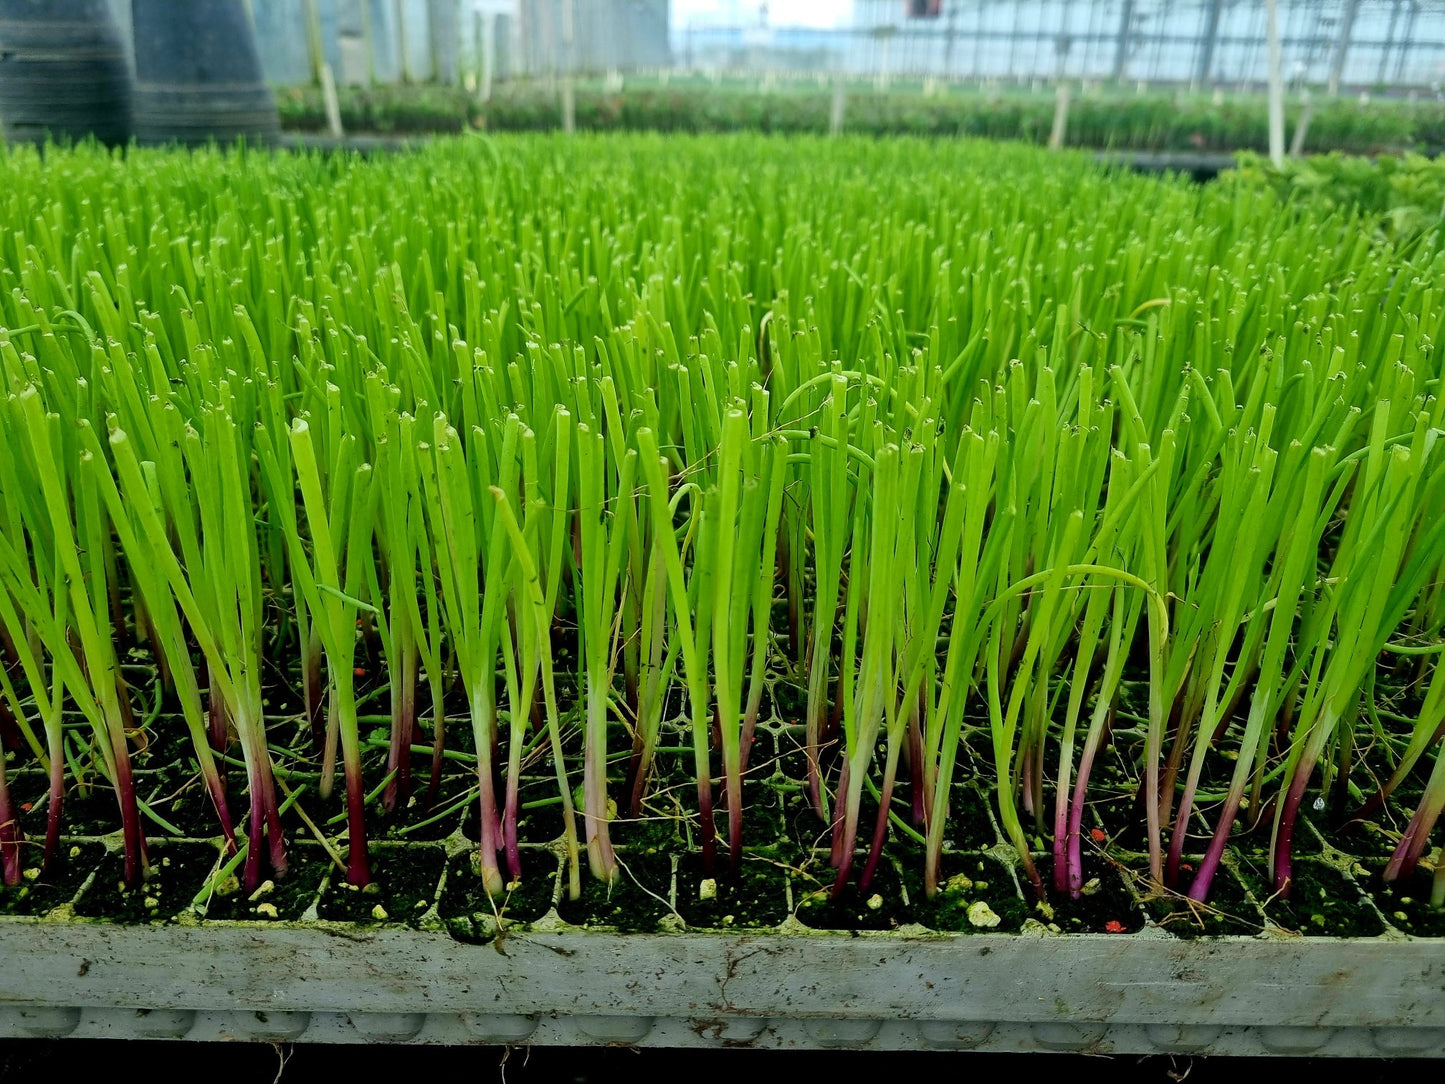 PRE-ORDER 10% OFF - Red Onion Plug Plants "Grow Your Own" Vegetables **Letterbox Friendly**